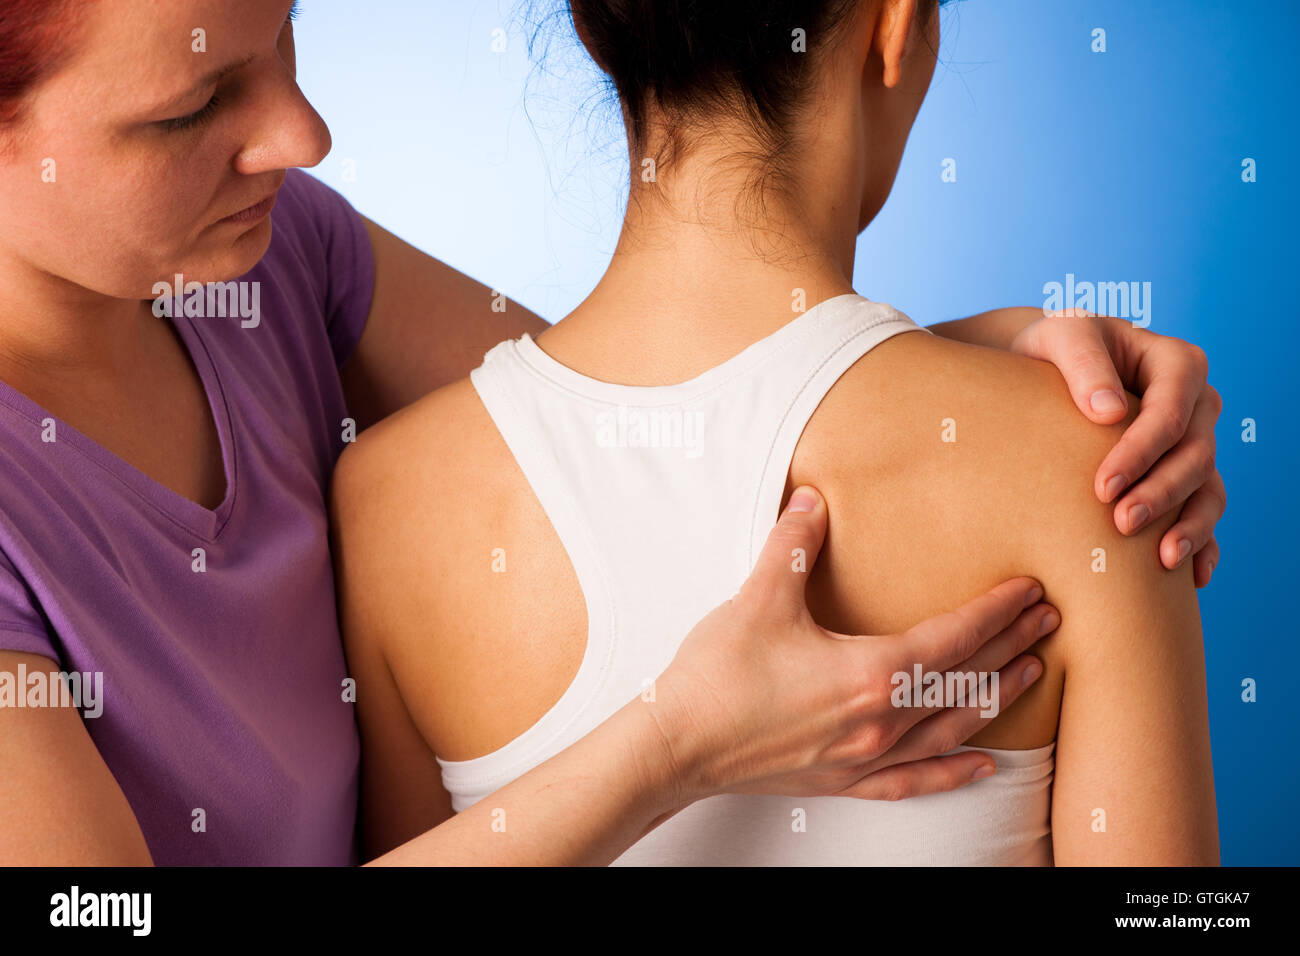 physio therapist helping Woman having pain in her back - back injury Stock Photo